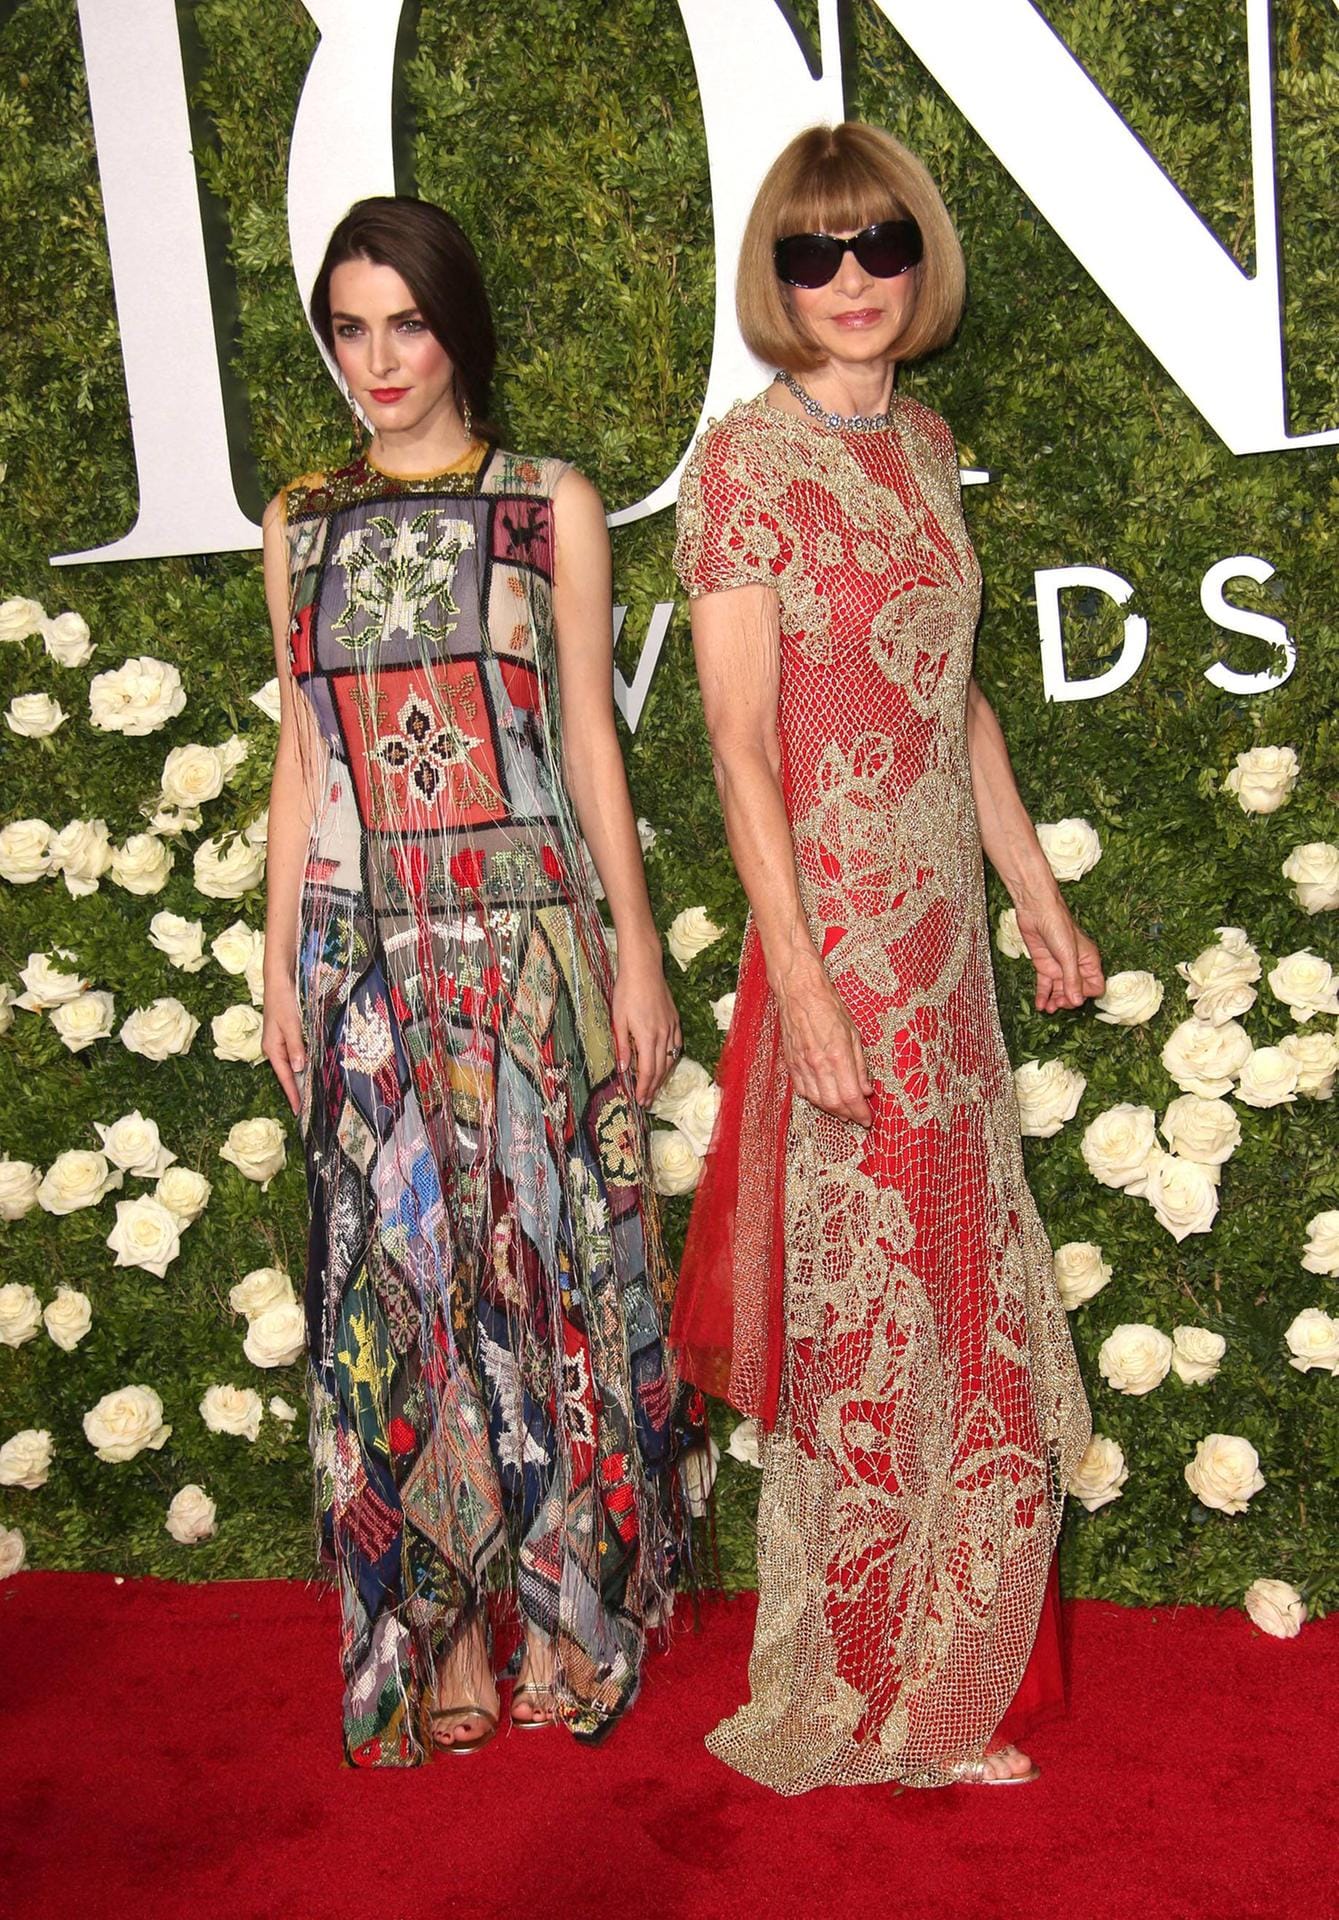 June 11 2017 New York N Y USA BEE SHAFFER ANNA WINTOUR attend the 71st Annual Tony Awards Re